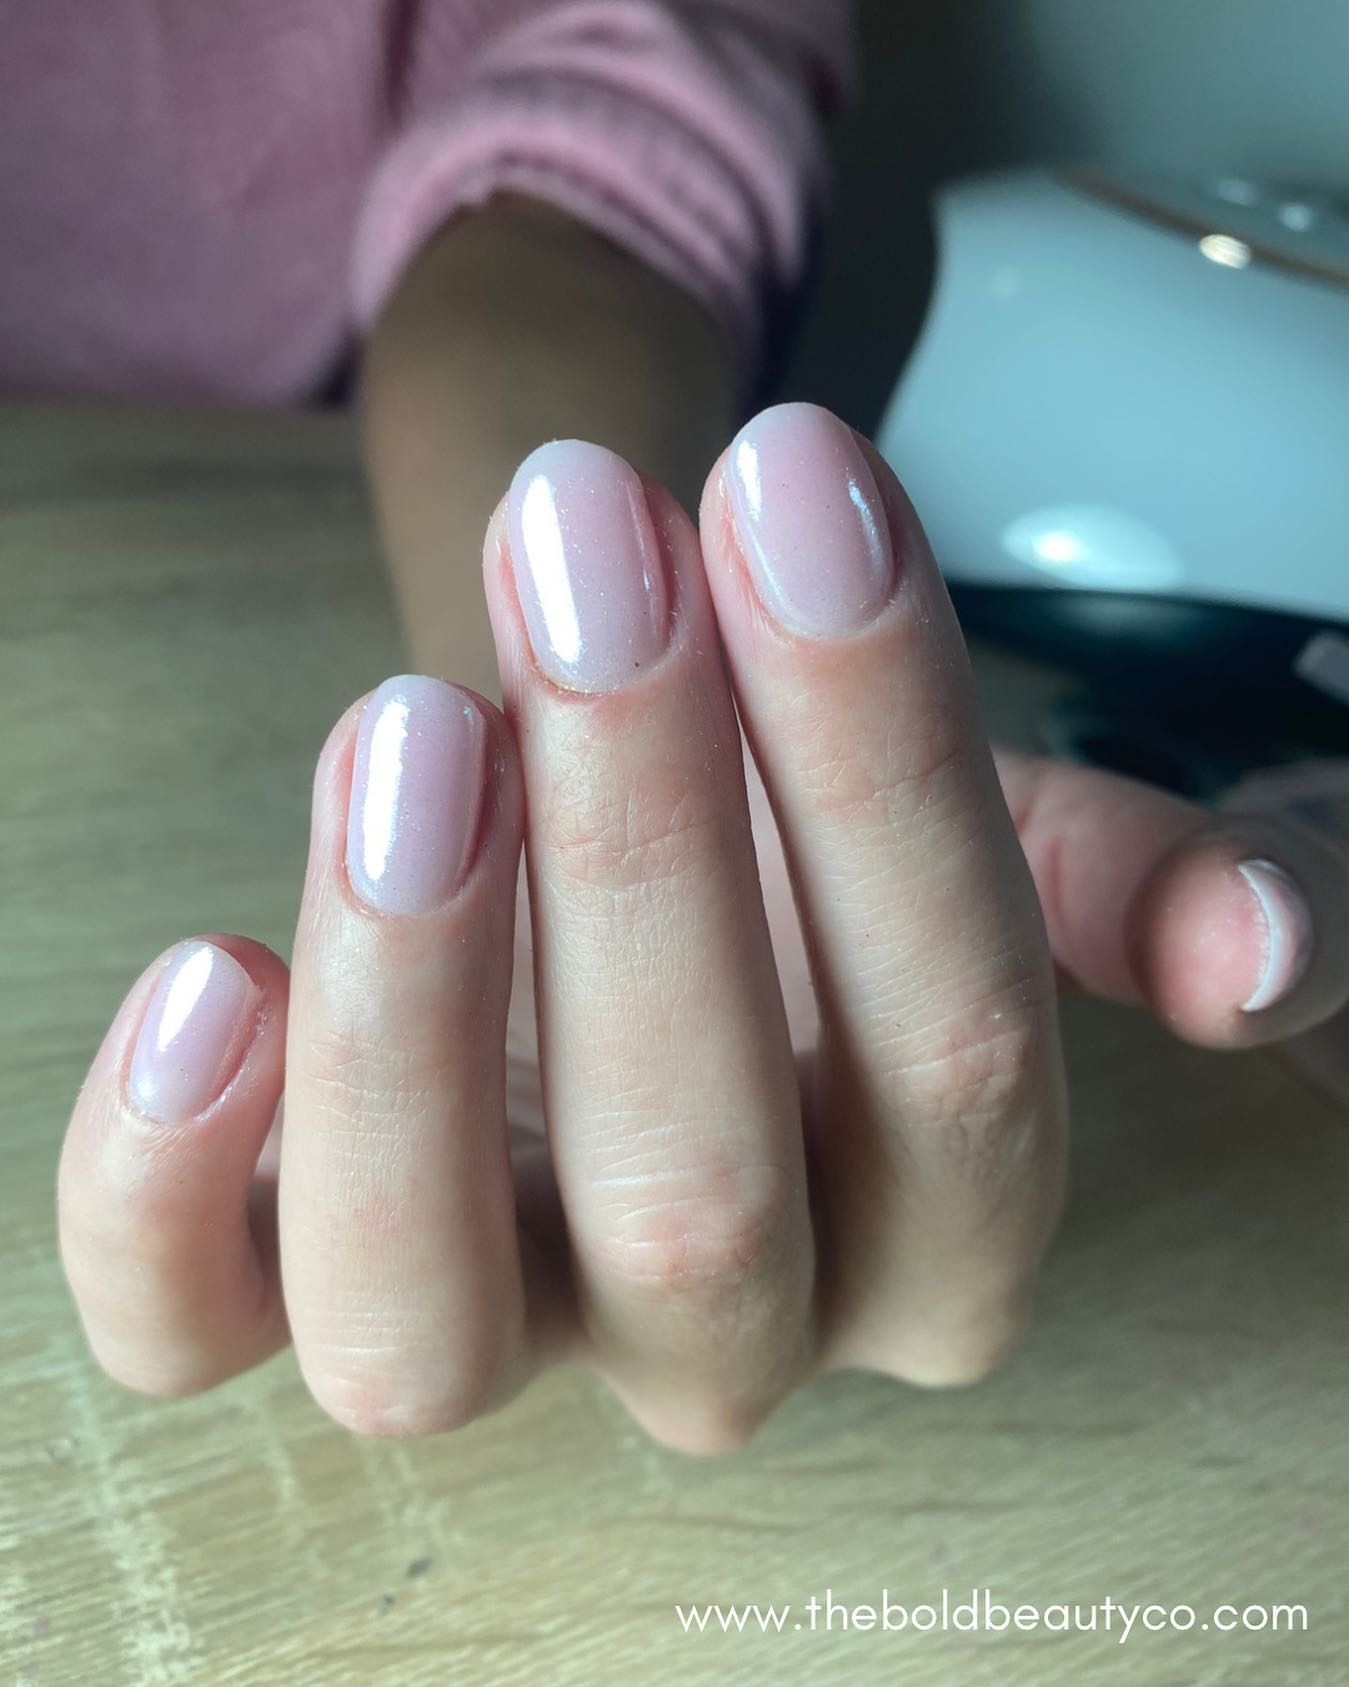 Beyond Plain & Simple: The Lady Nails Trend as a Rich Girl Manicure Makeover